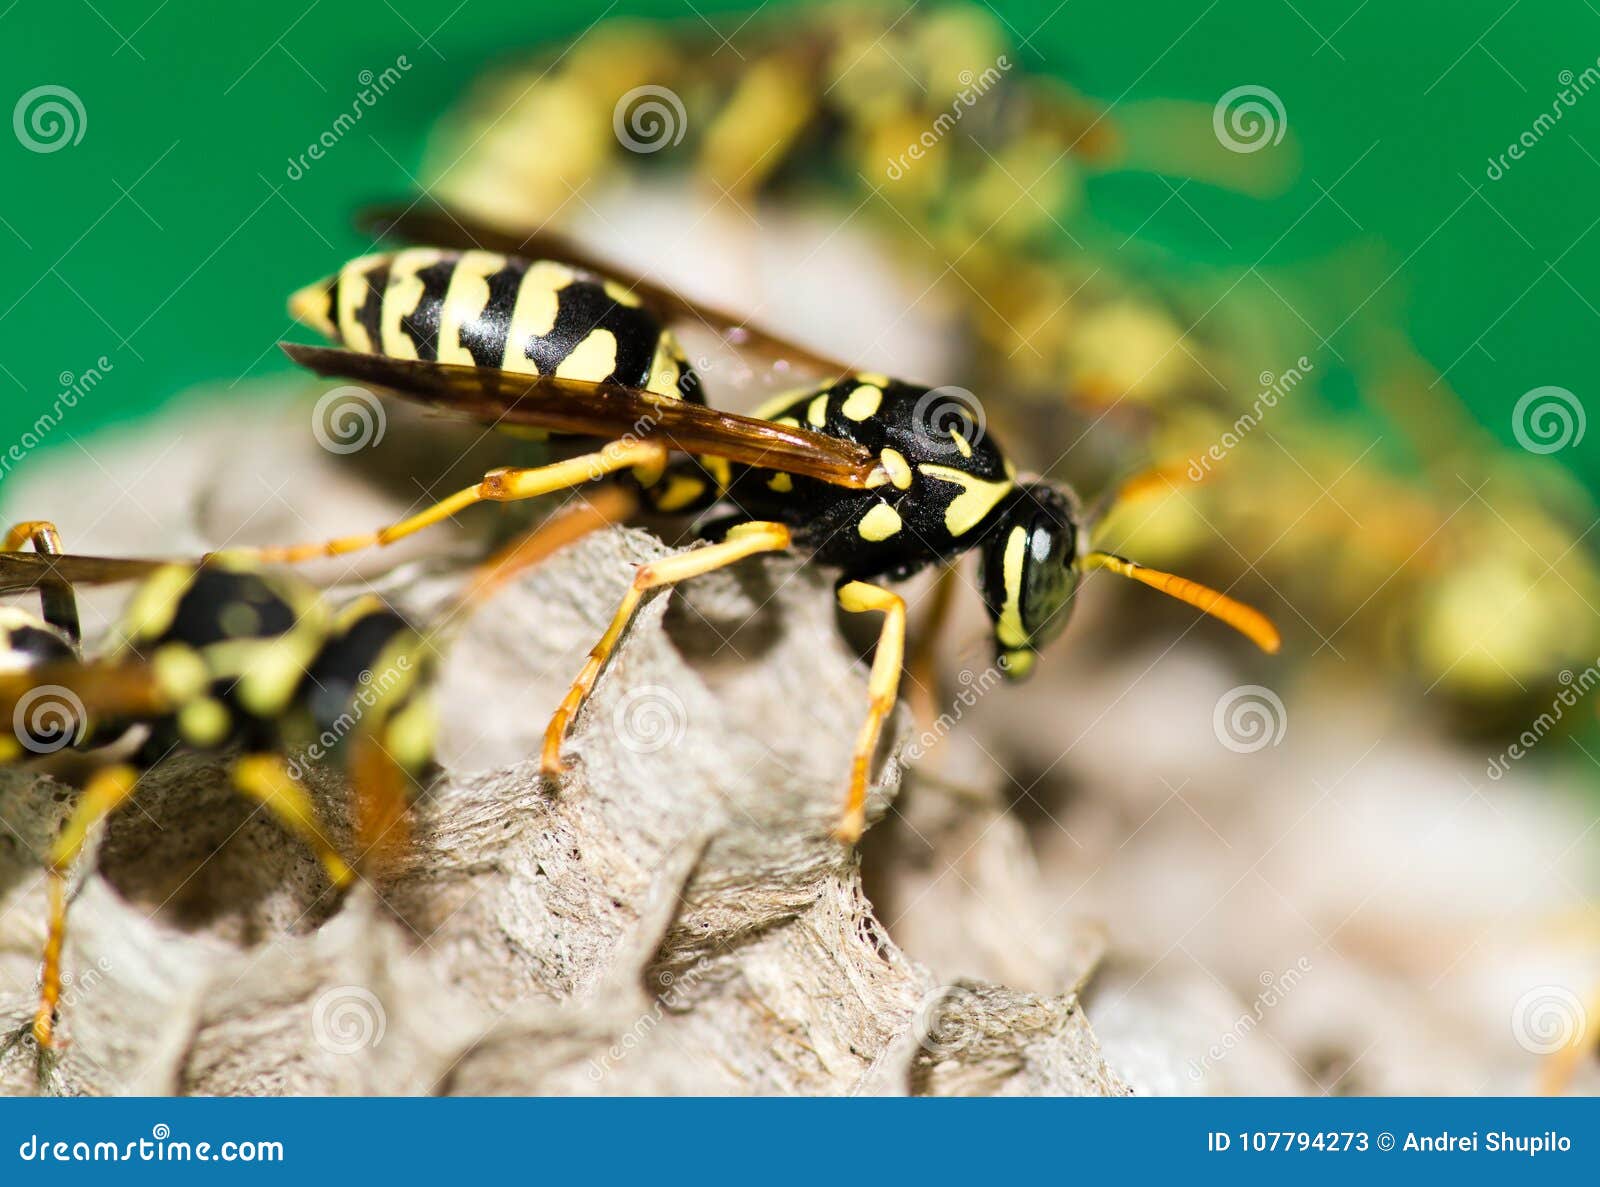 A wasp for hives in stock image. Image of wildlife -